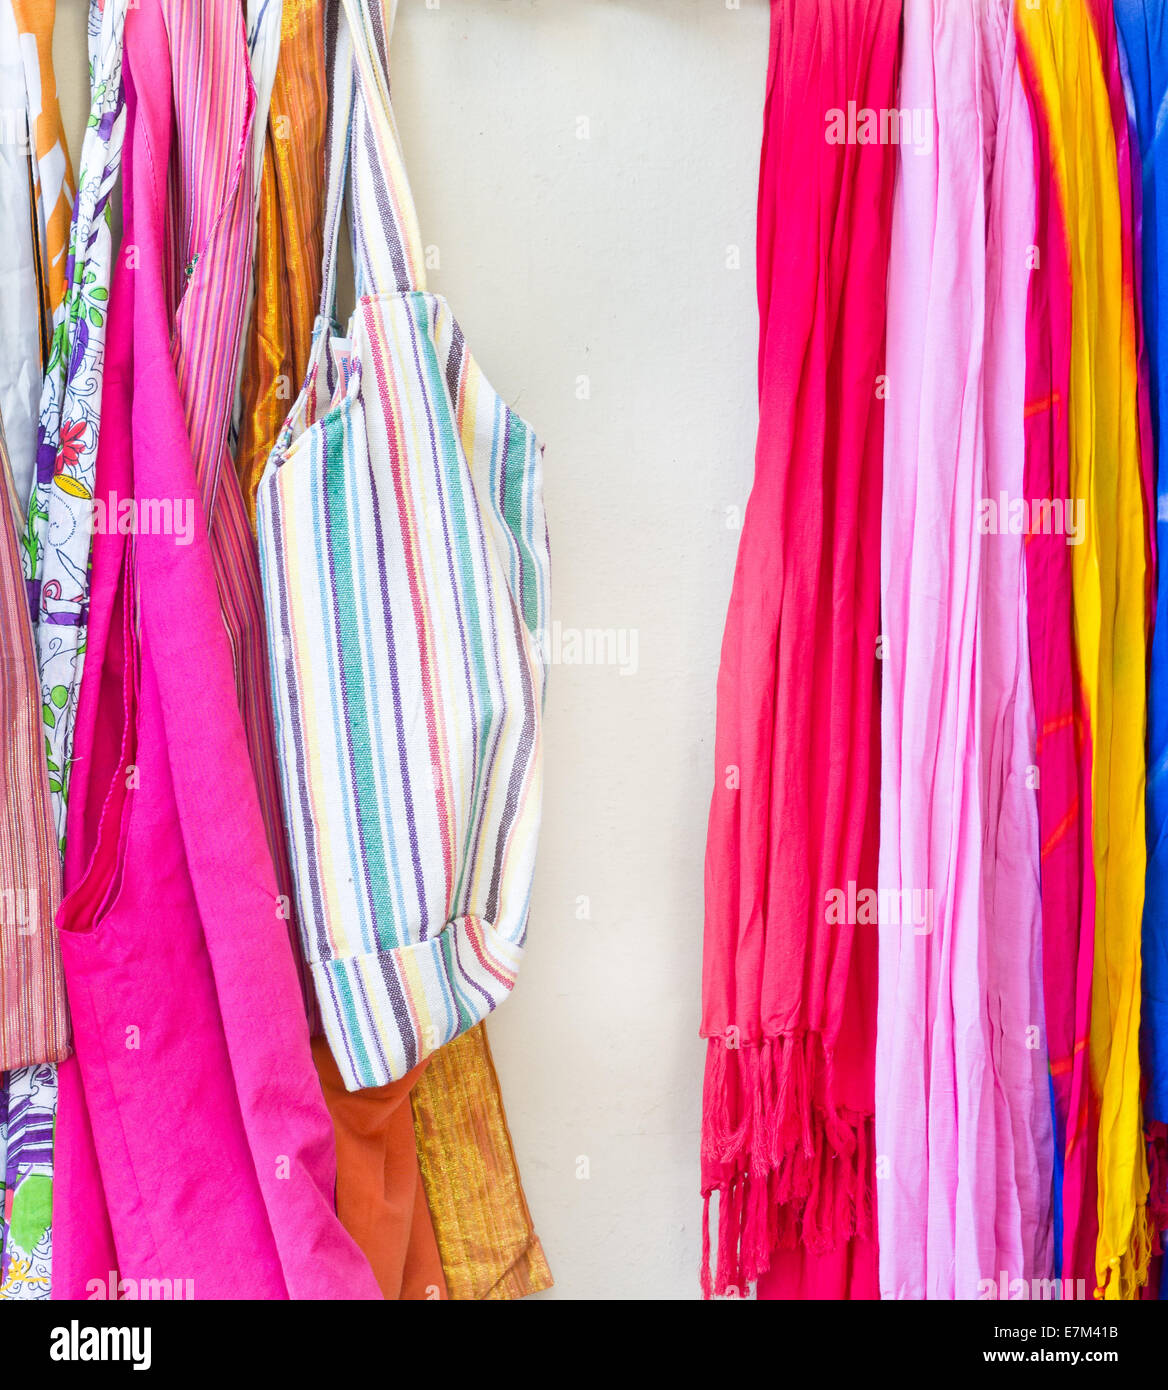 Vibrant scarves and bags on a rack at a store Stock Photo